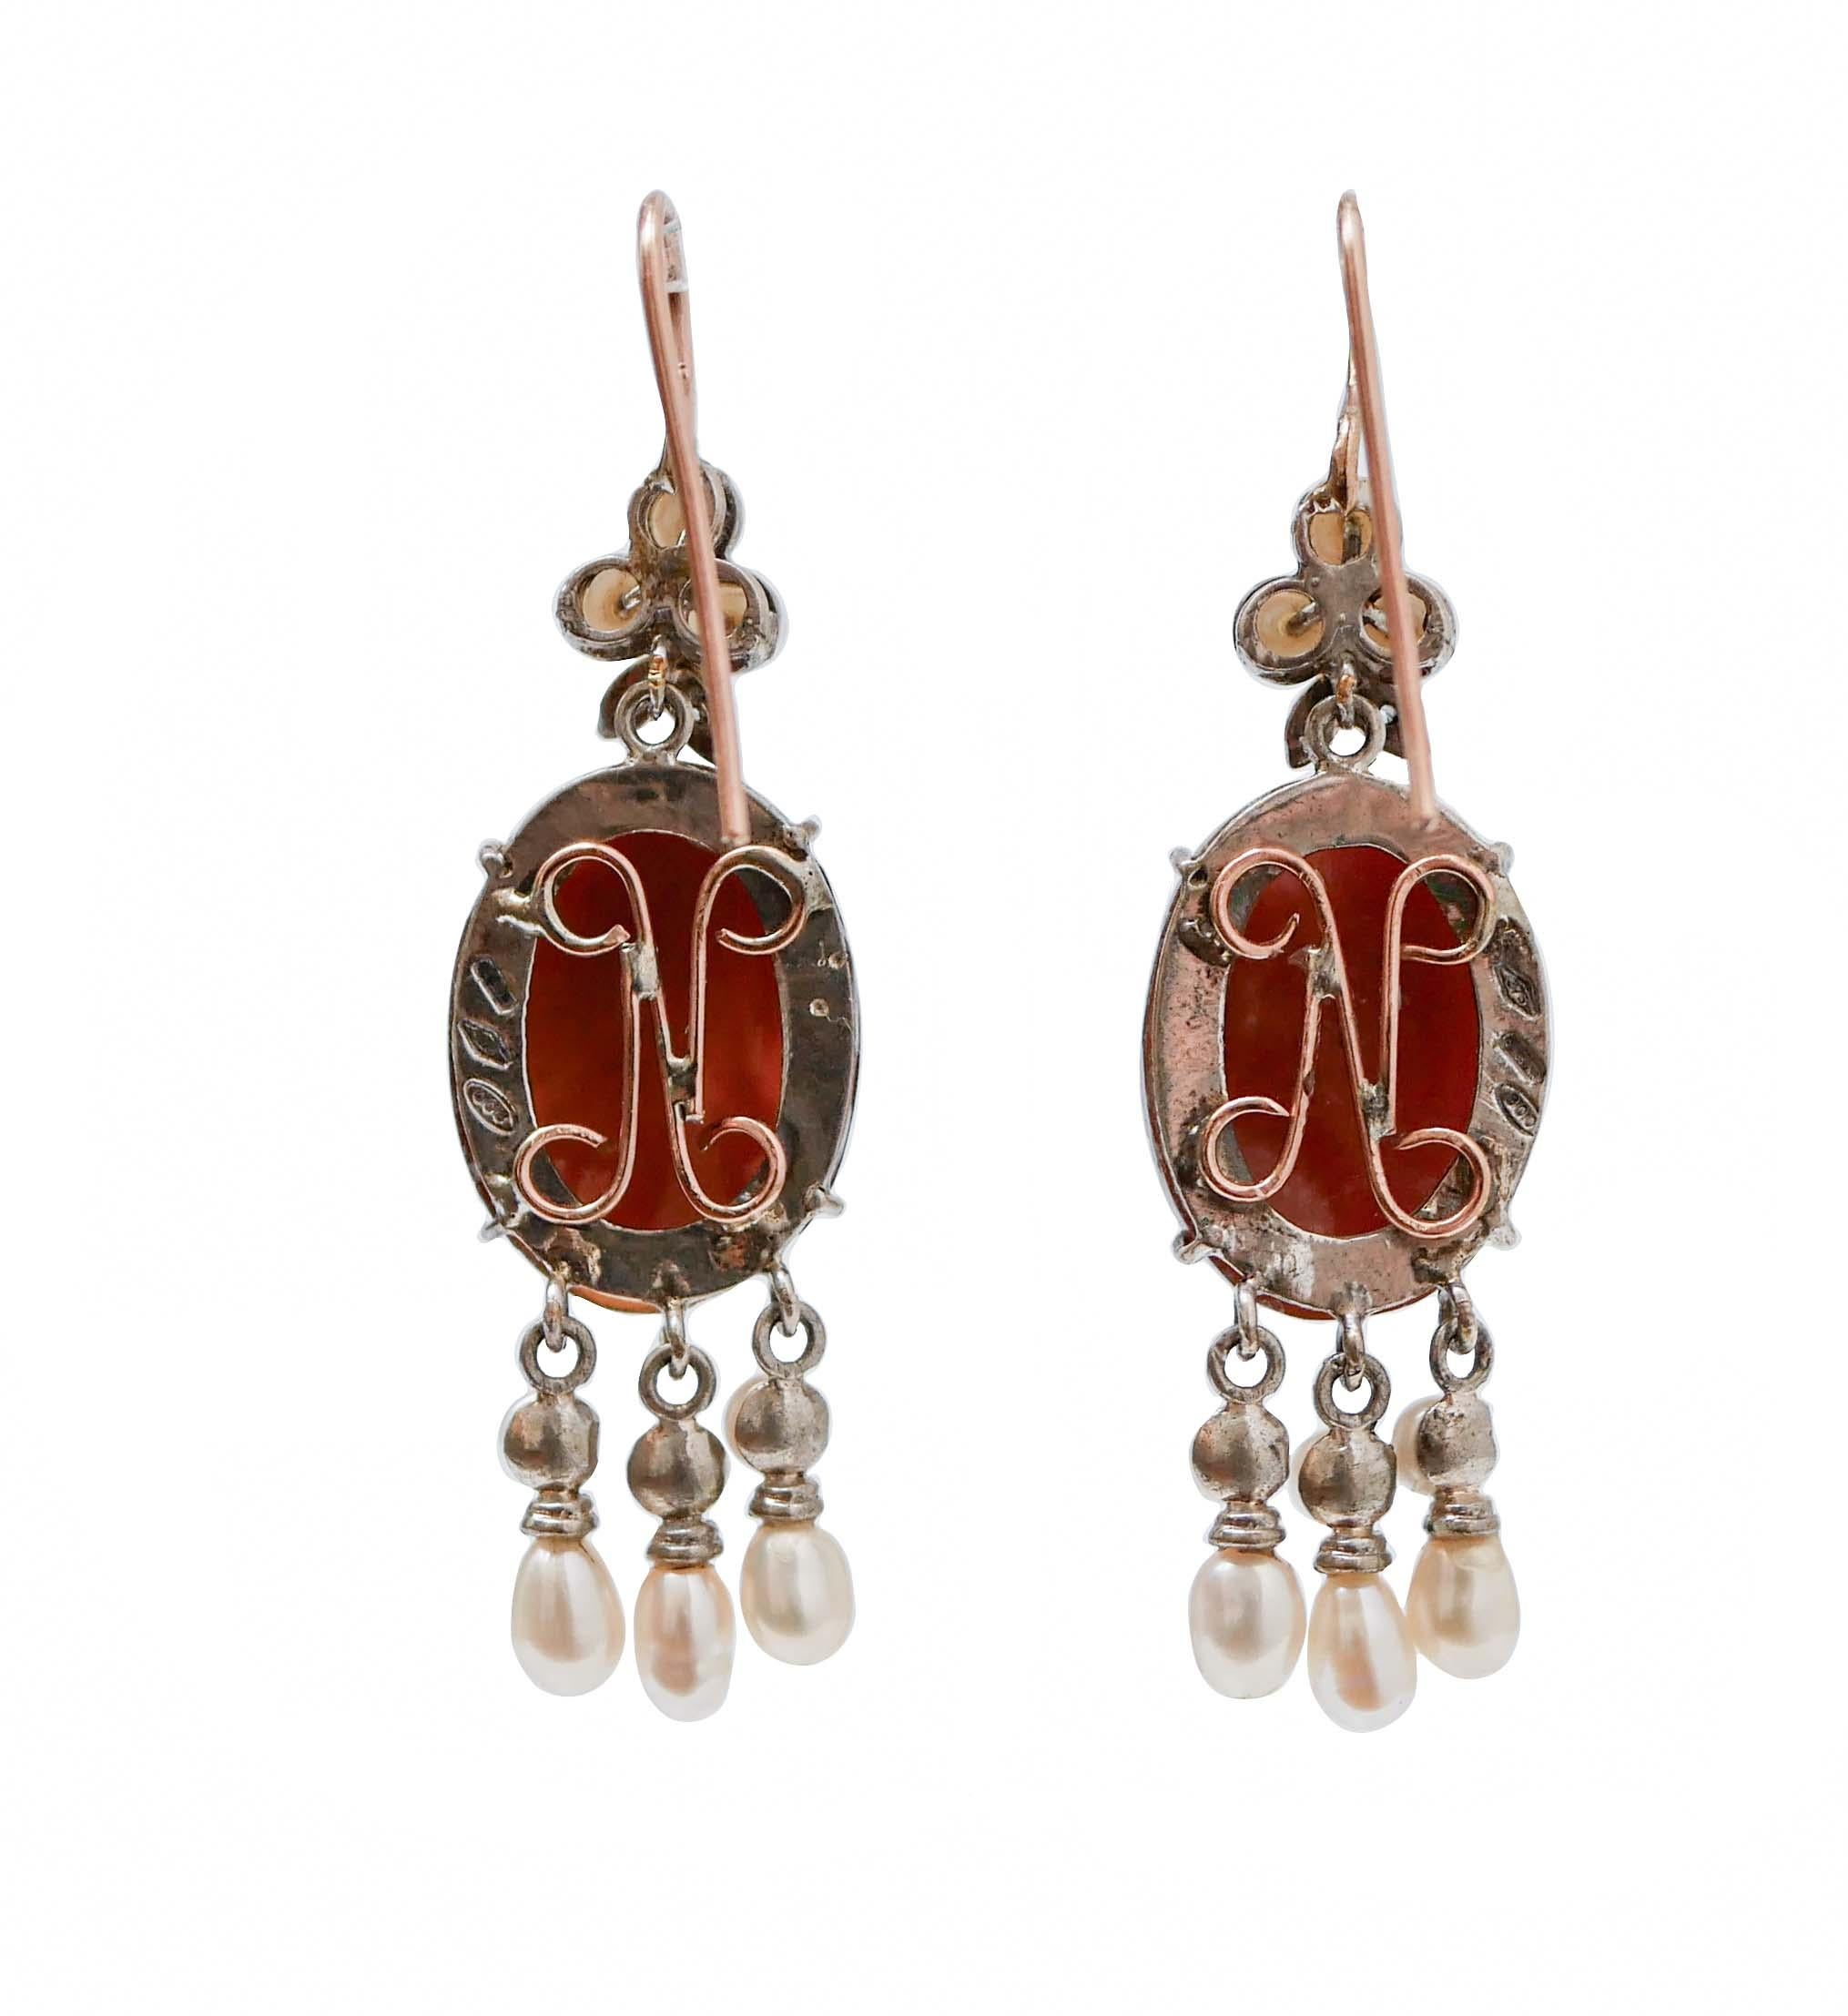 Retro Cameo, Pearls, Diamonds, Rose Gold and Silver Retrò Earrings. For Sale